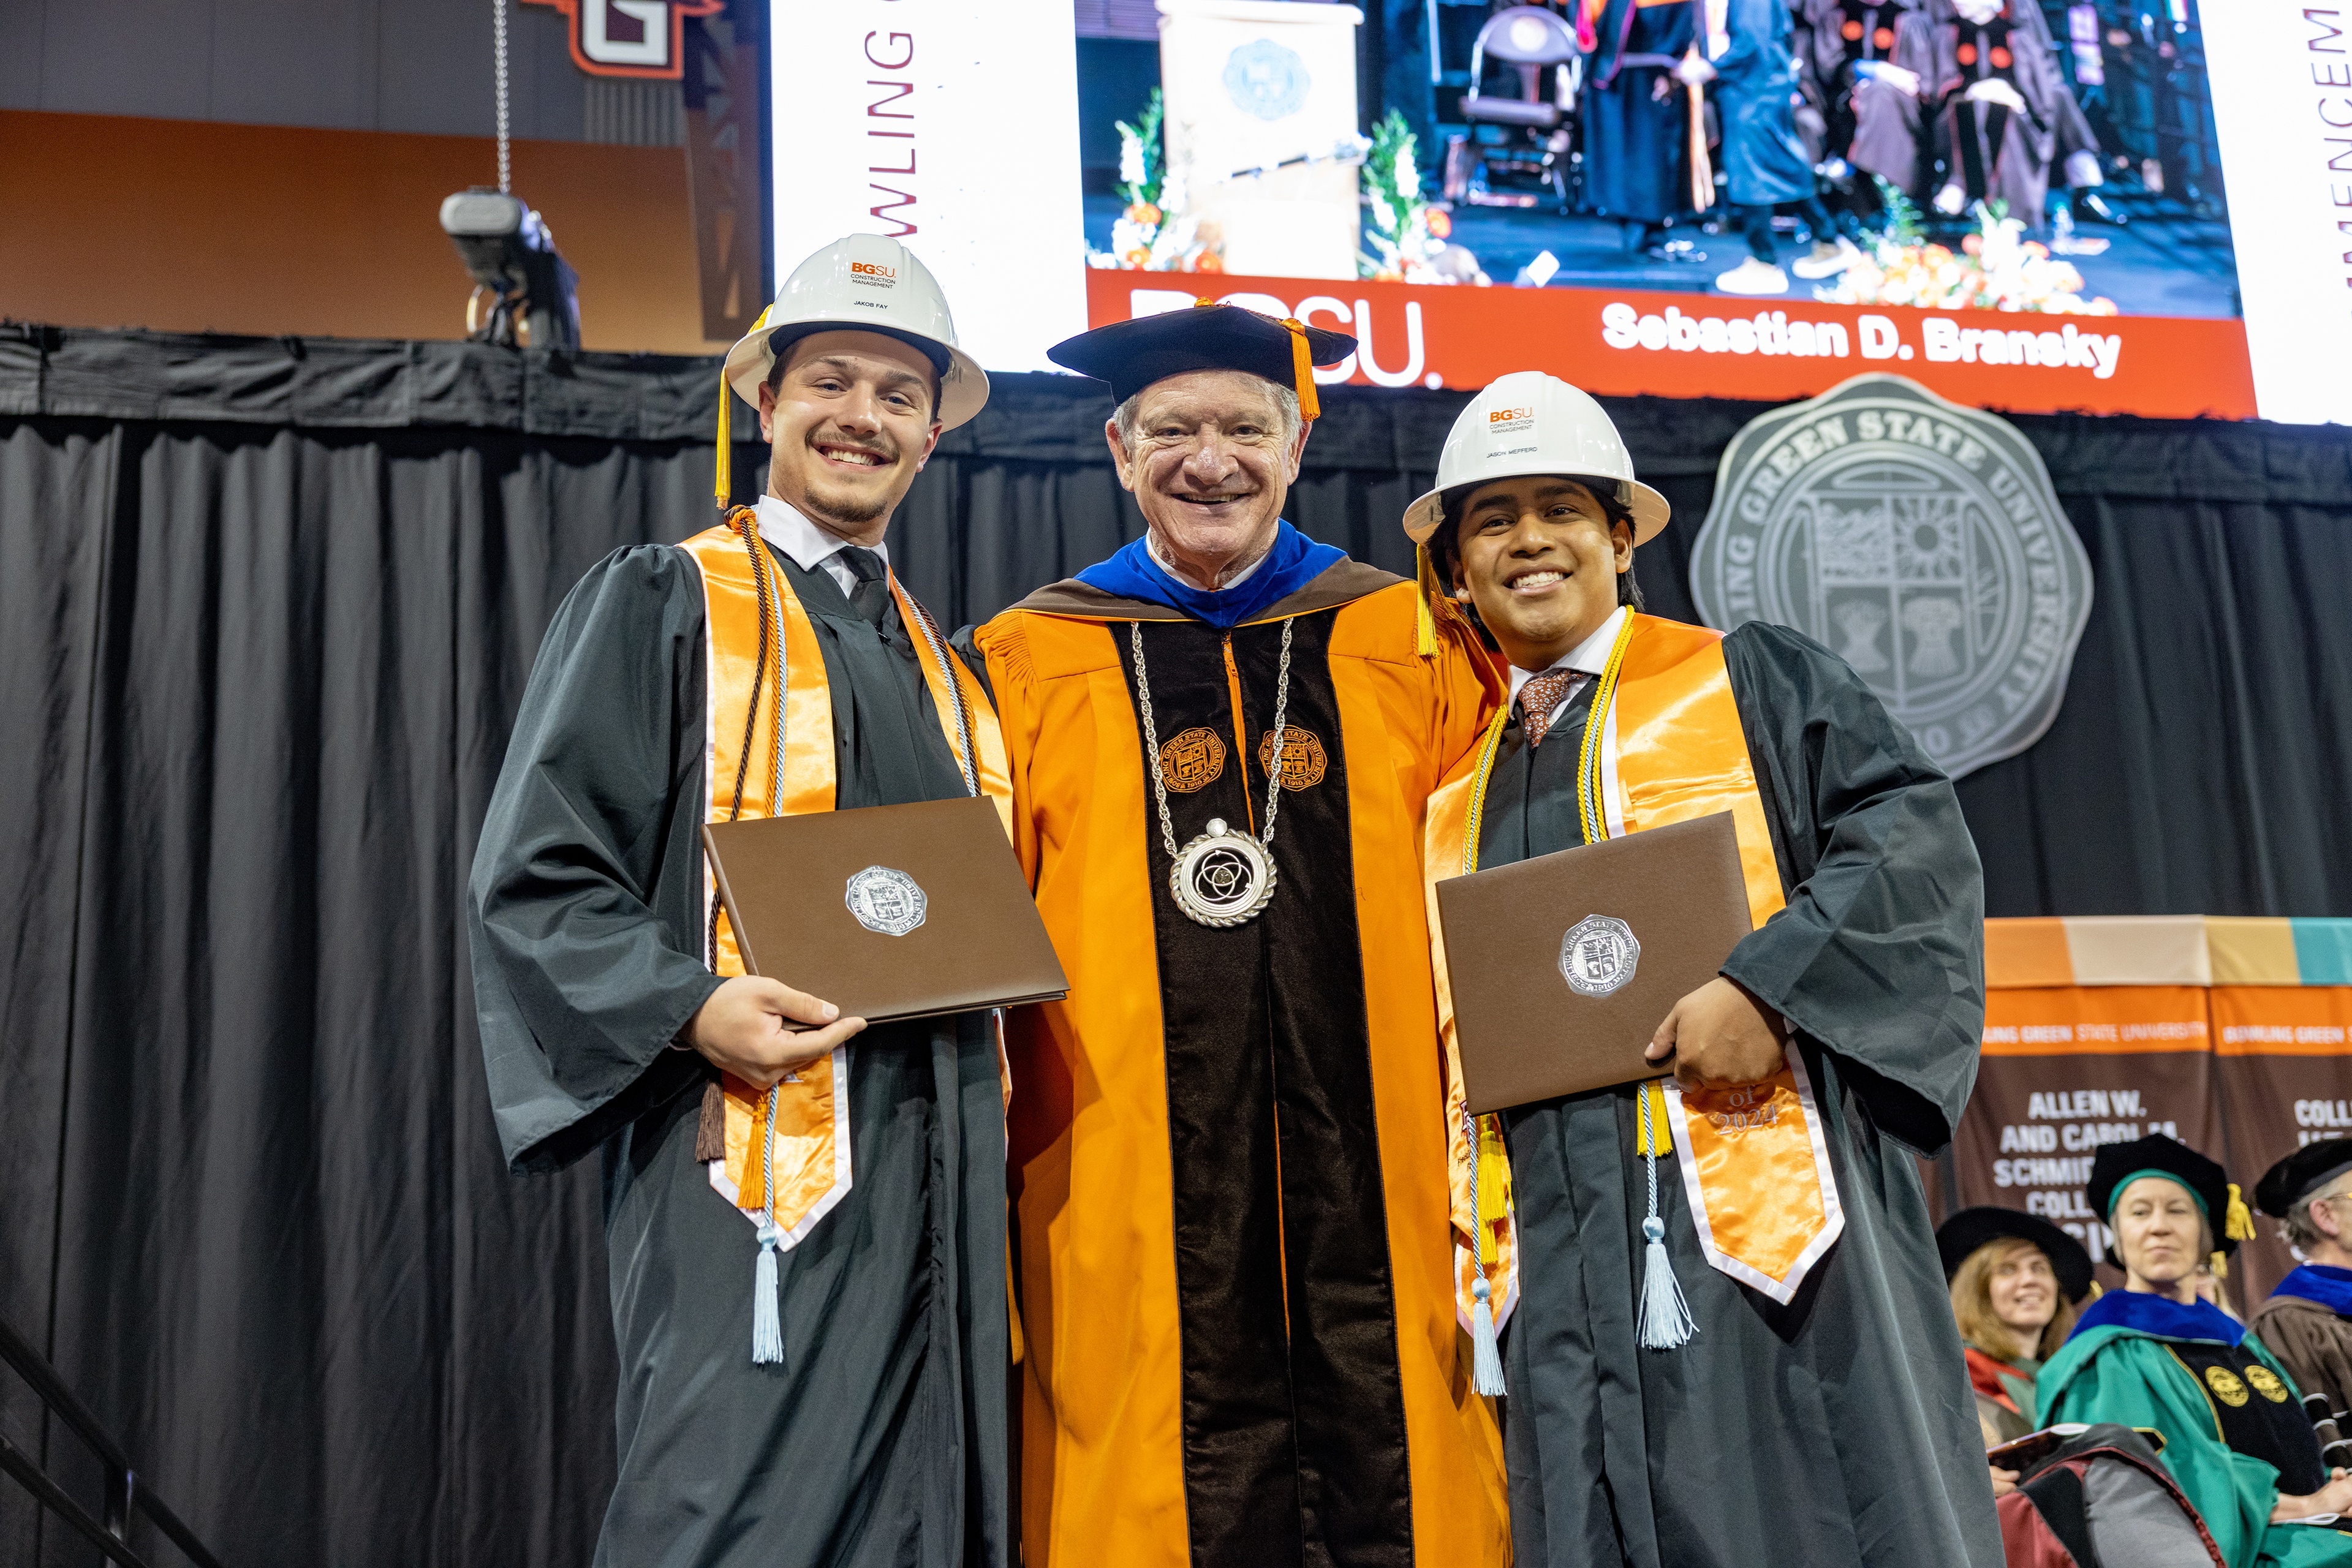 BGSU President Rodney K. Rogers poses for a photo with two graduates wearing hard hats